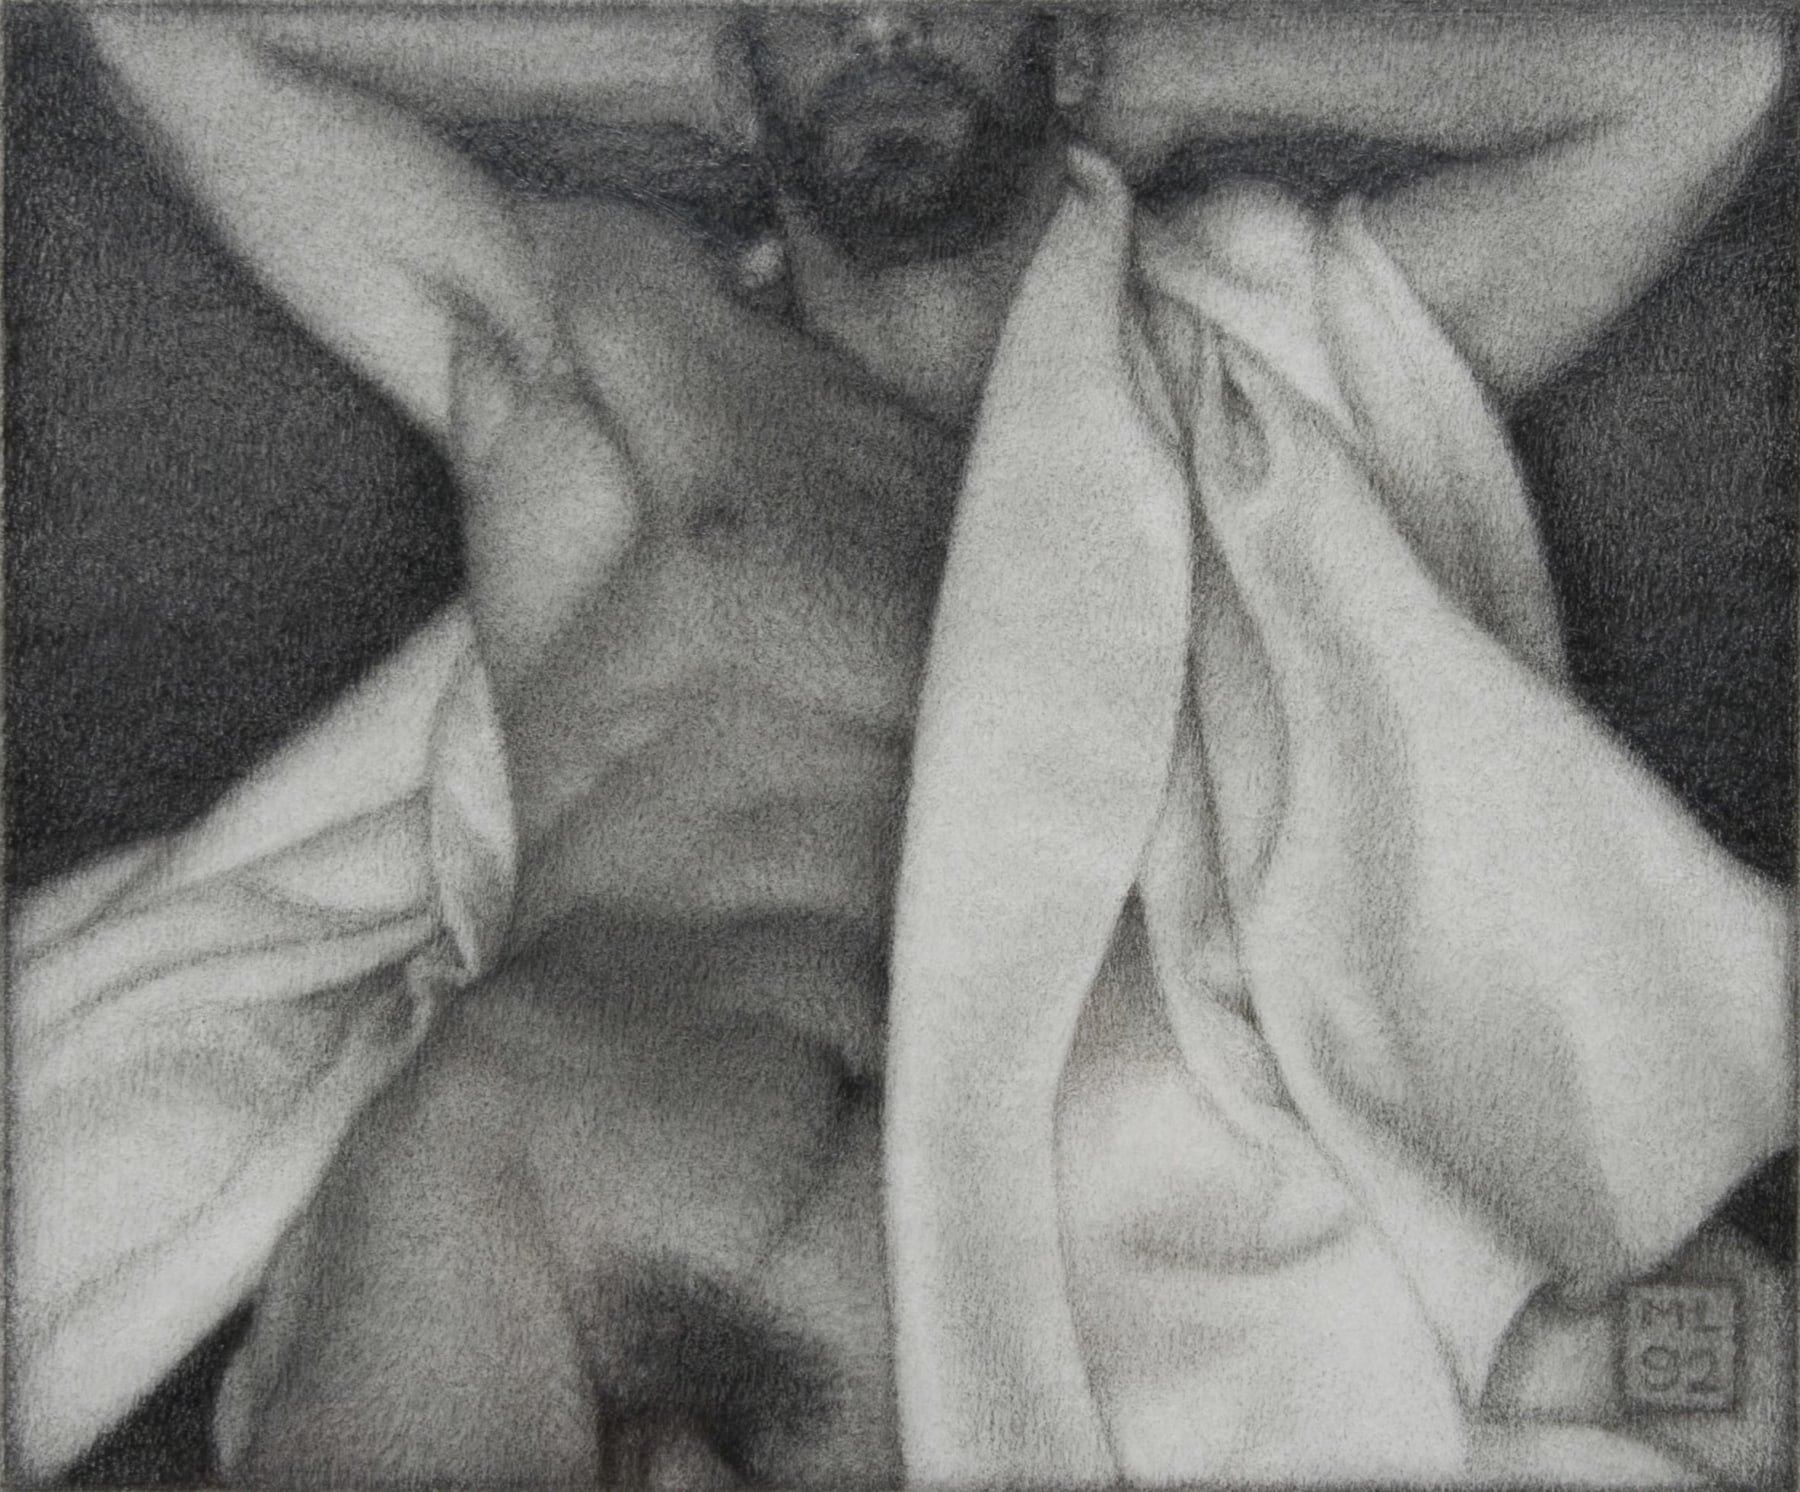 Michael Leonard, Relaxing Bather, 1992, graphite pencil on paper, 7 x 8 1/2 inches